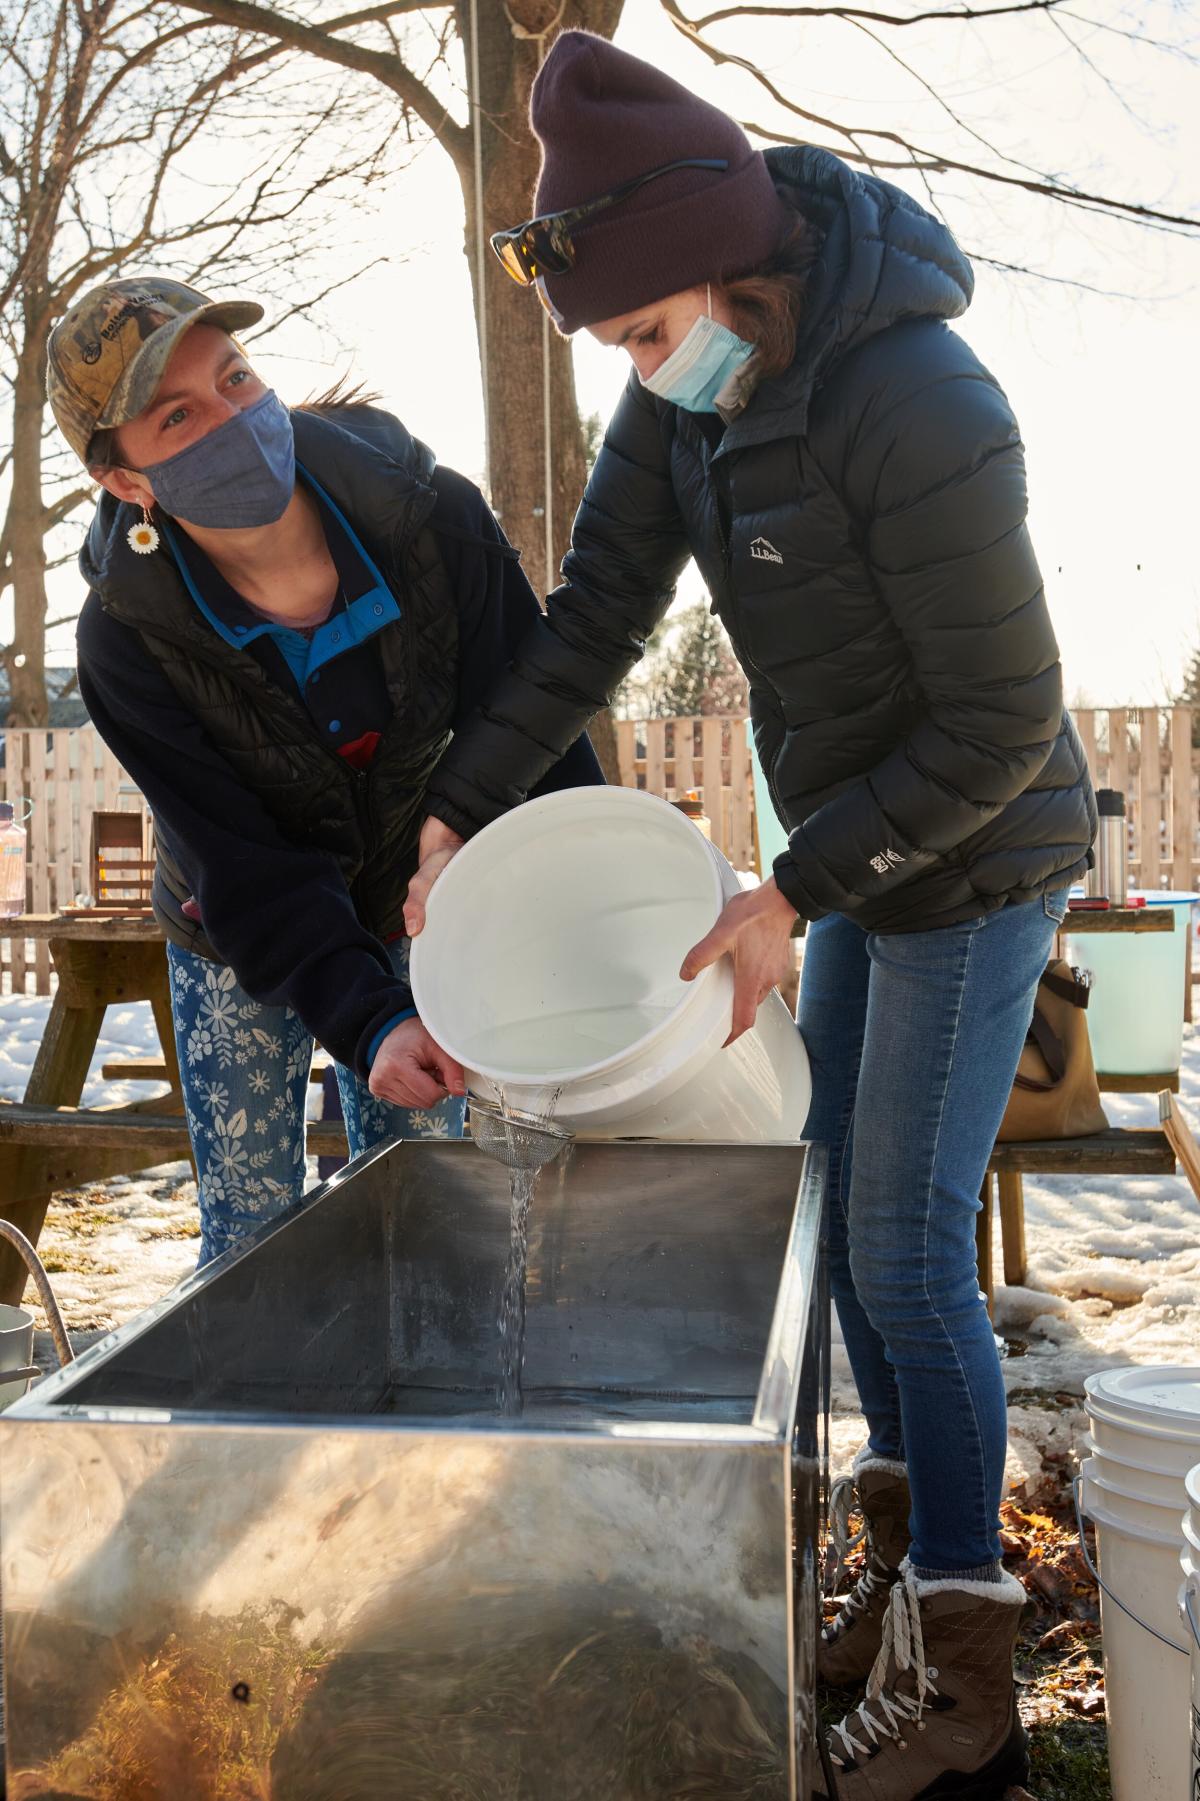 Sisters Maeve and Wynne Poleman, who are part of the Tap O.N.E. team and educators in the Winooski school system, had access to a portable evaporator, sap buckets, and sugaring gear through their father, Professor Walter Poleman. Professor Poleman, an ecologist and senior lecturer at the Rubenstein School of Environment and Natural Resources at UVM, has done extensive work around place-based education, an approach to teaching that uses the local landscape, culture, and heritage as a foundation for learning. Professor Poleman is the one who encouraged the group to create more engagement with the community through sugaring. “In a lot of my work recently, I’ve been partnering with the City of Burlington on this idea of being able to use the city as classroom,” he explains. “Sugaring just becomes an awesome opportunity to build a culture-nature connection at any scale.” - 